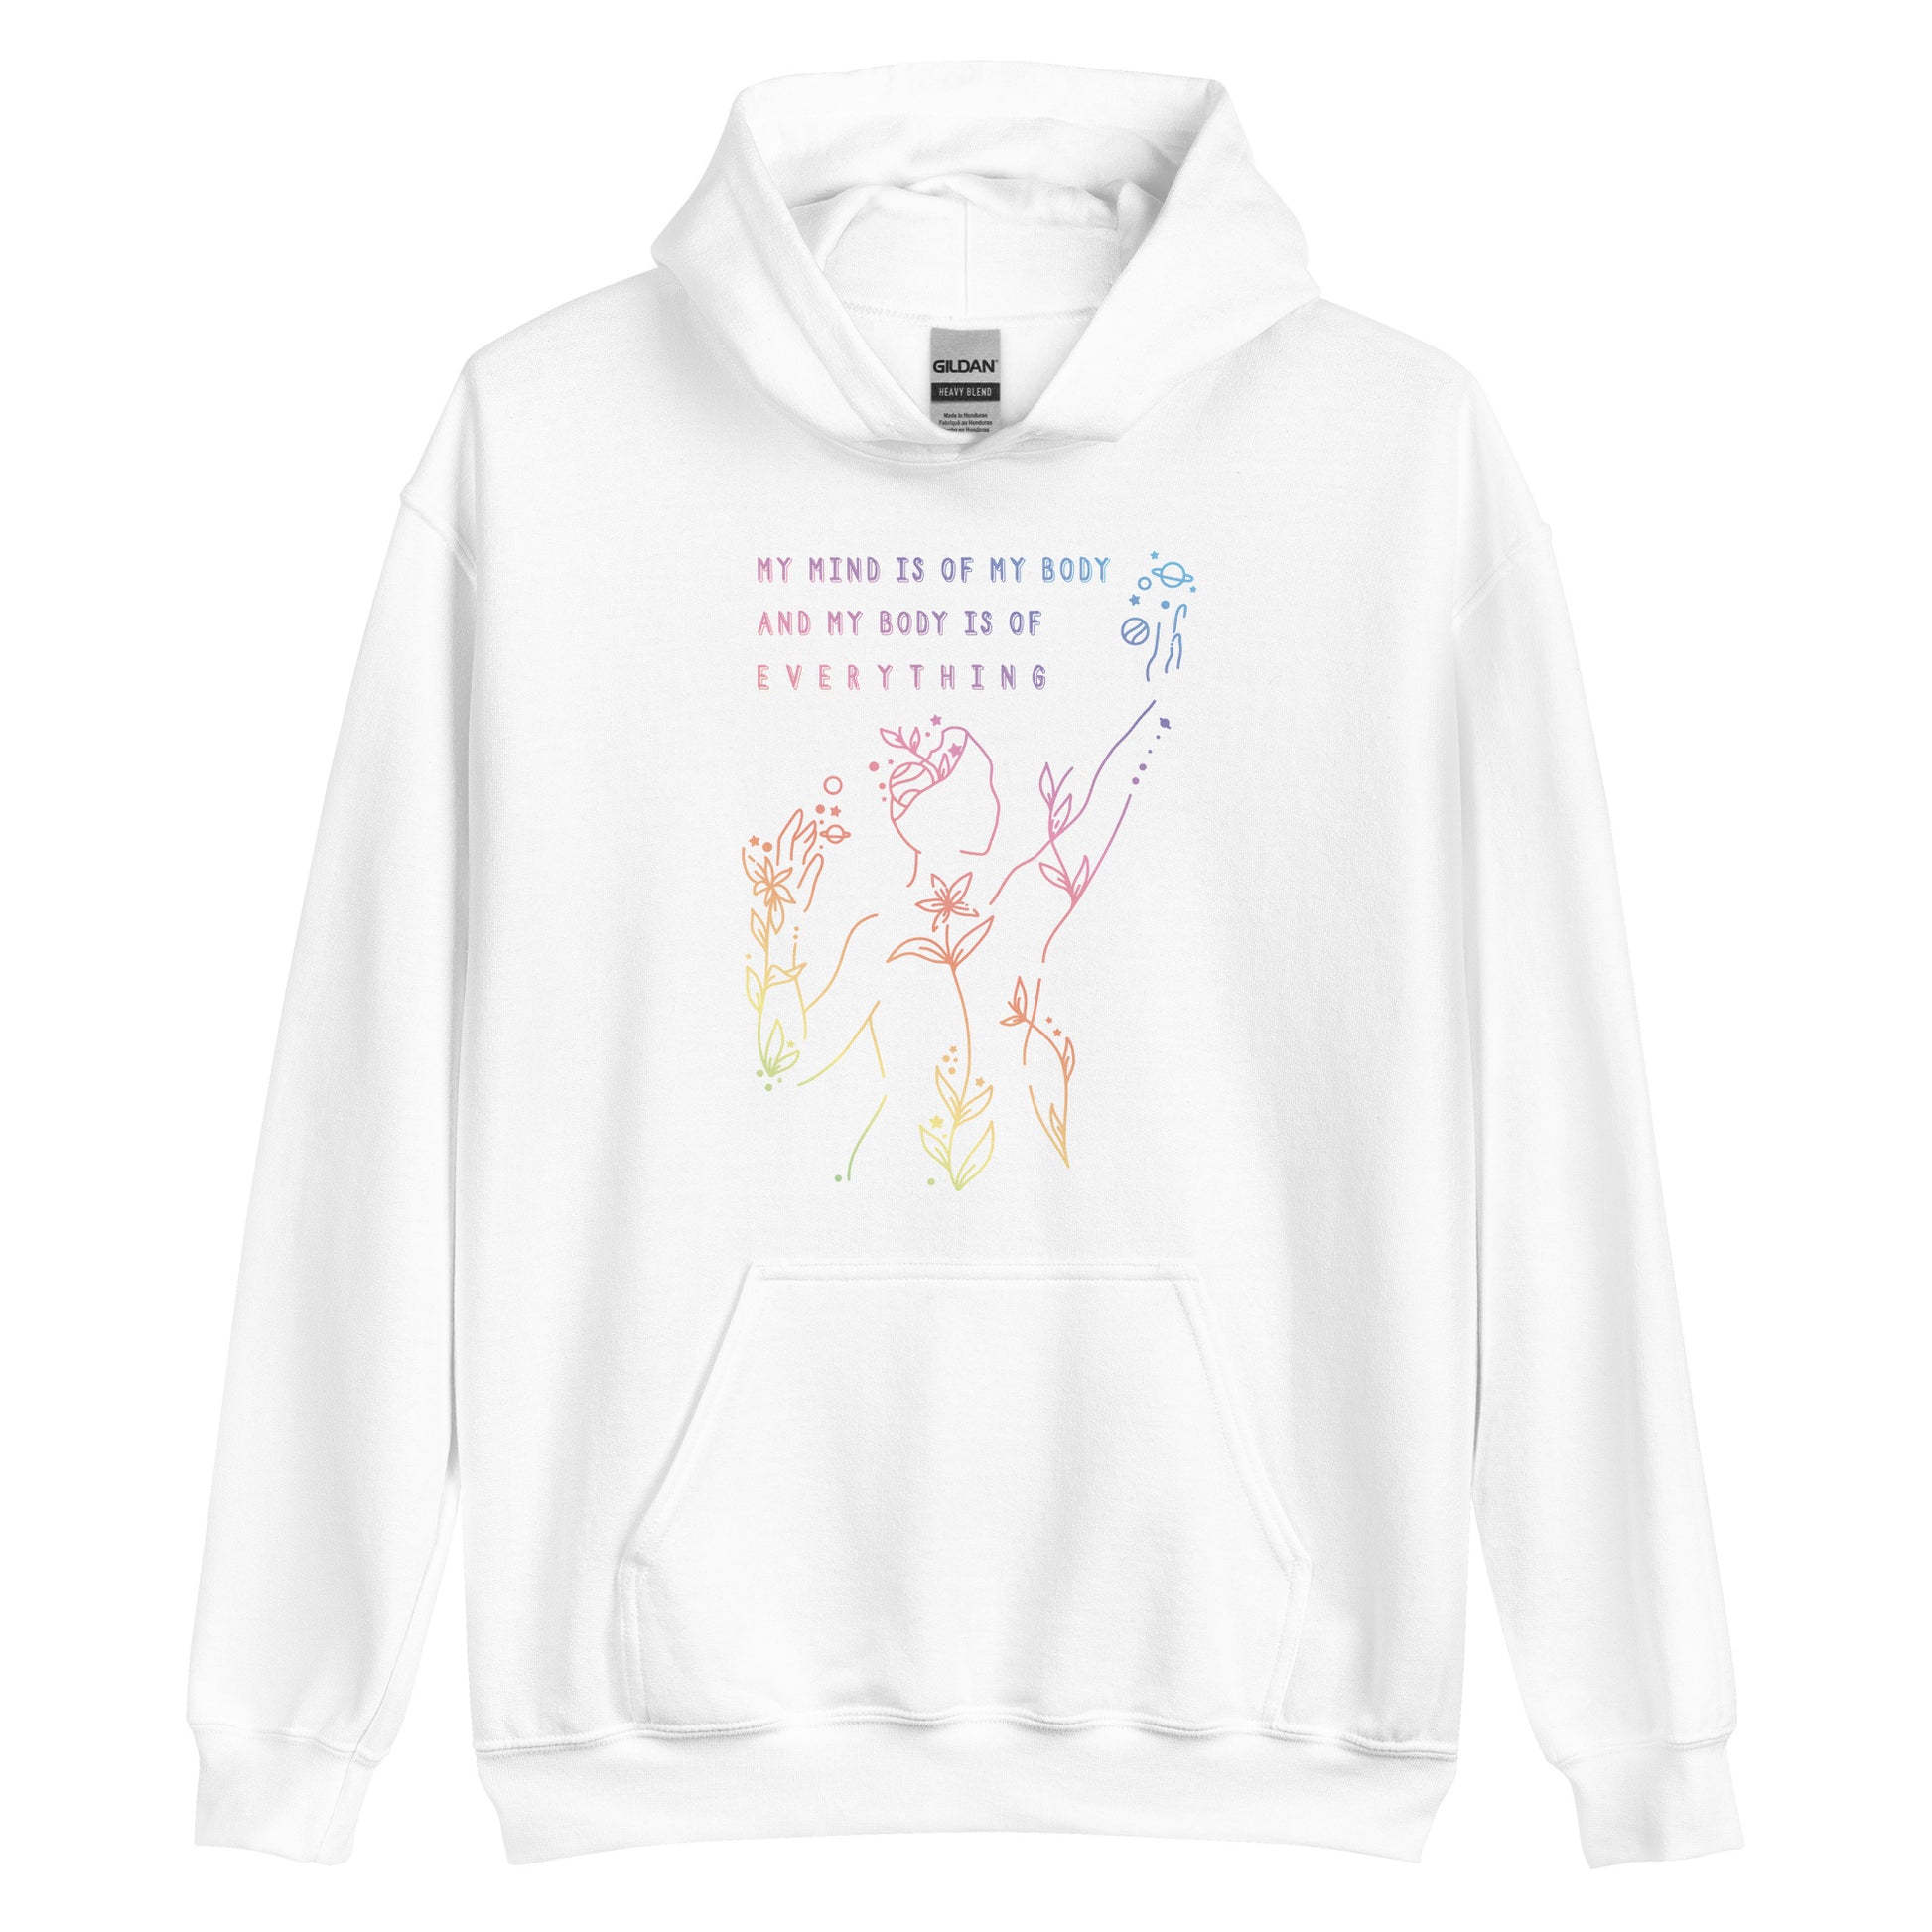 A white hooded sweatshirt featuring an abstract illustration of a figure whose body is spreading out into plants and planets and stars. Text above the figure reads "My mind is of my body and my body is of everything."